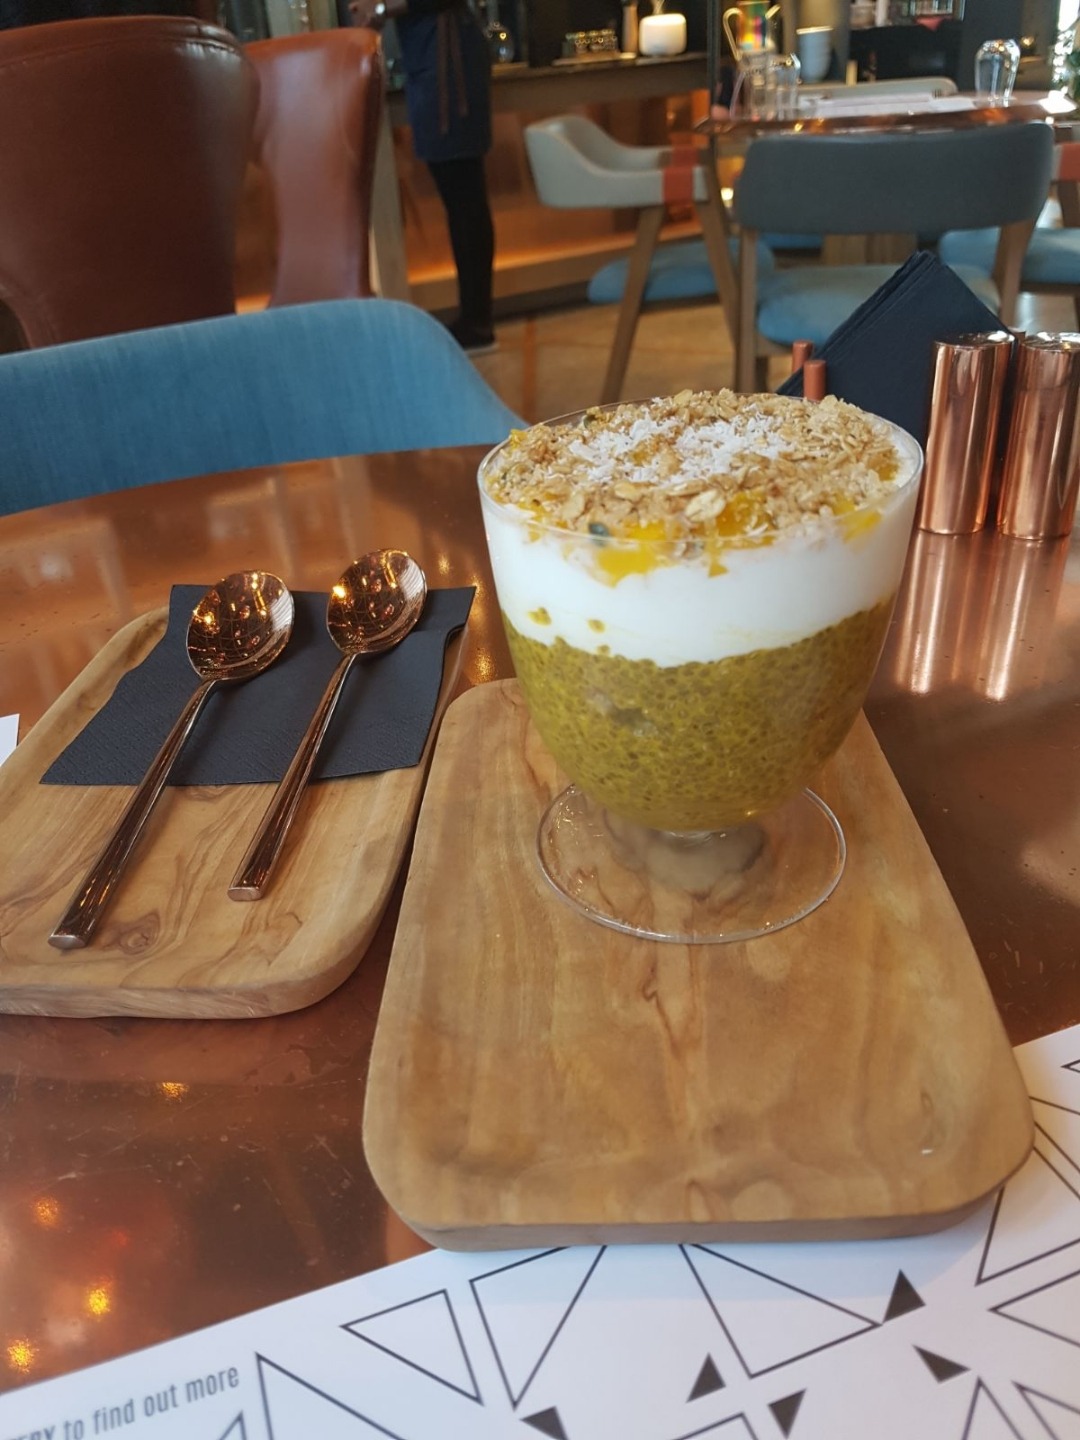 Chia seed pudding for breakfast @ Nomad Urban Eatery - Bahrain